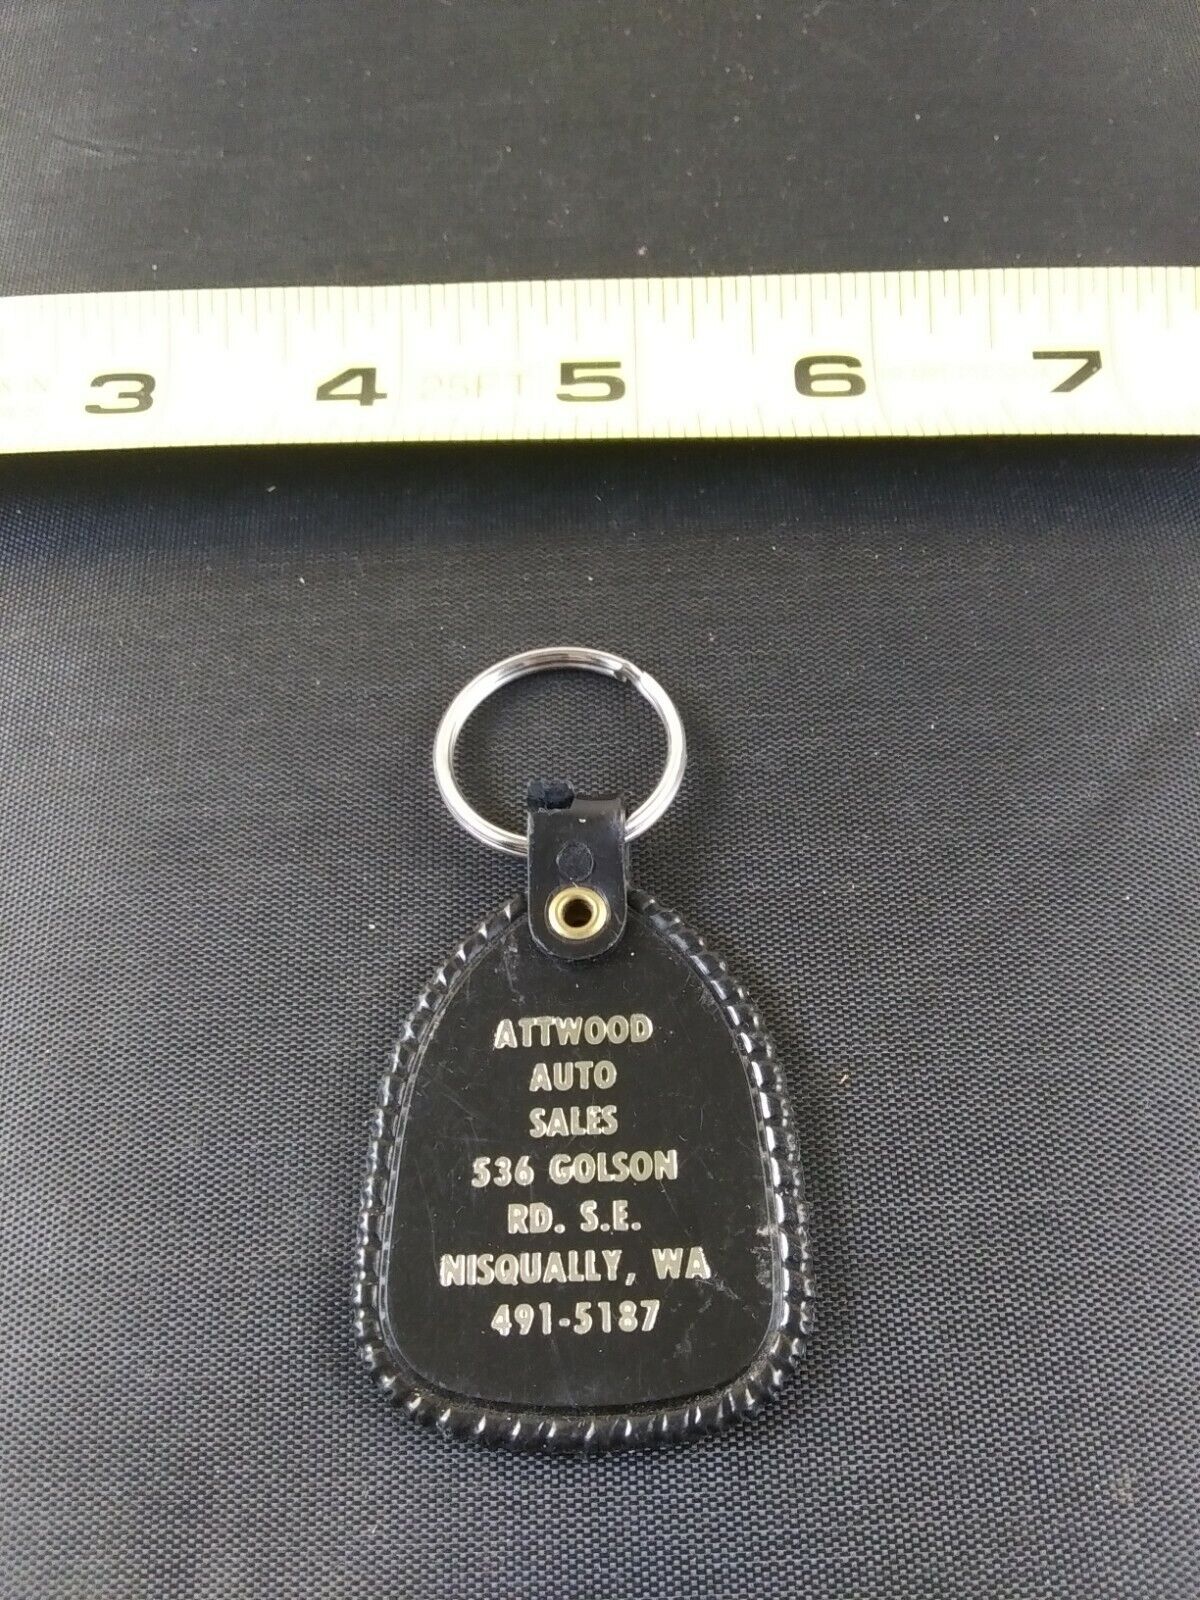 Vintage Attwood Auto Sales Keychain Key Ring Chain Style Hangtag Fob *EE57